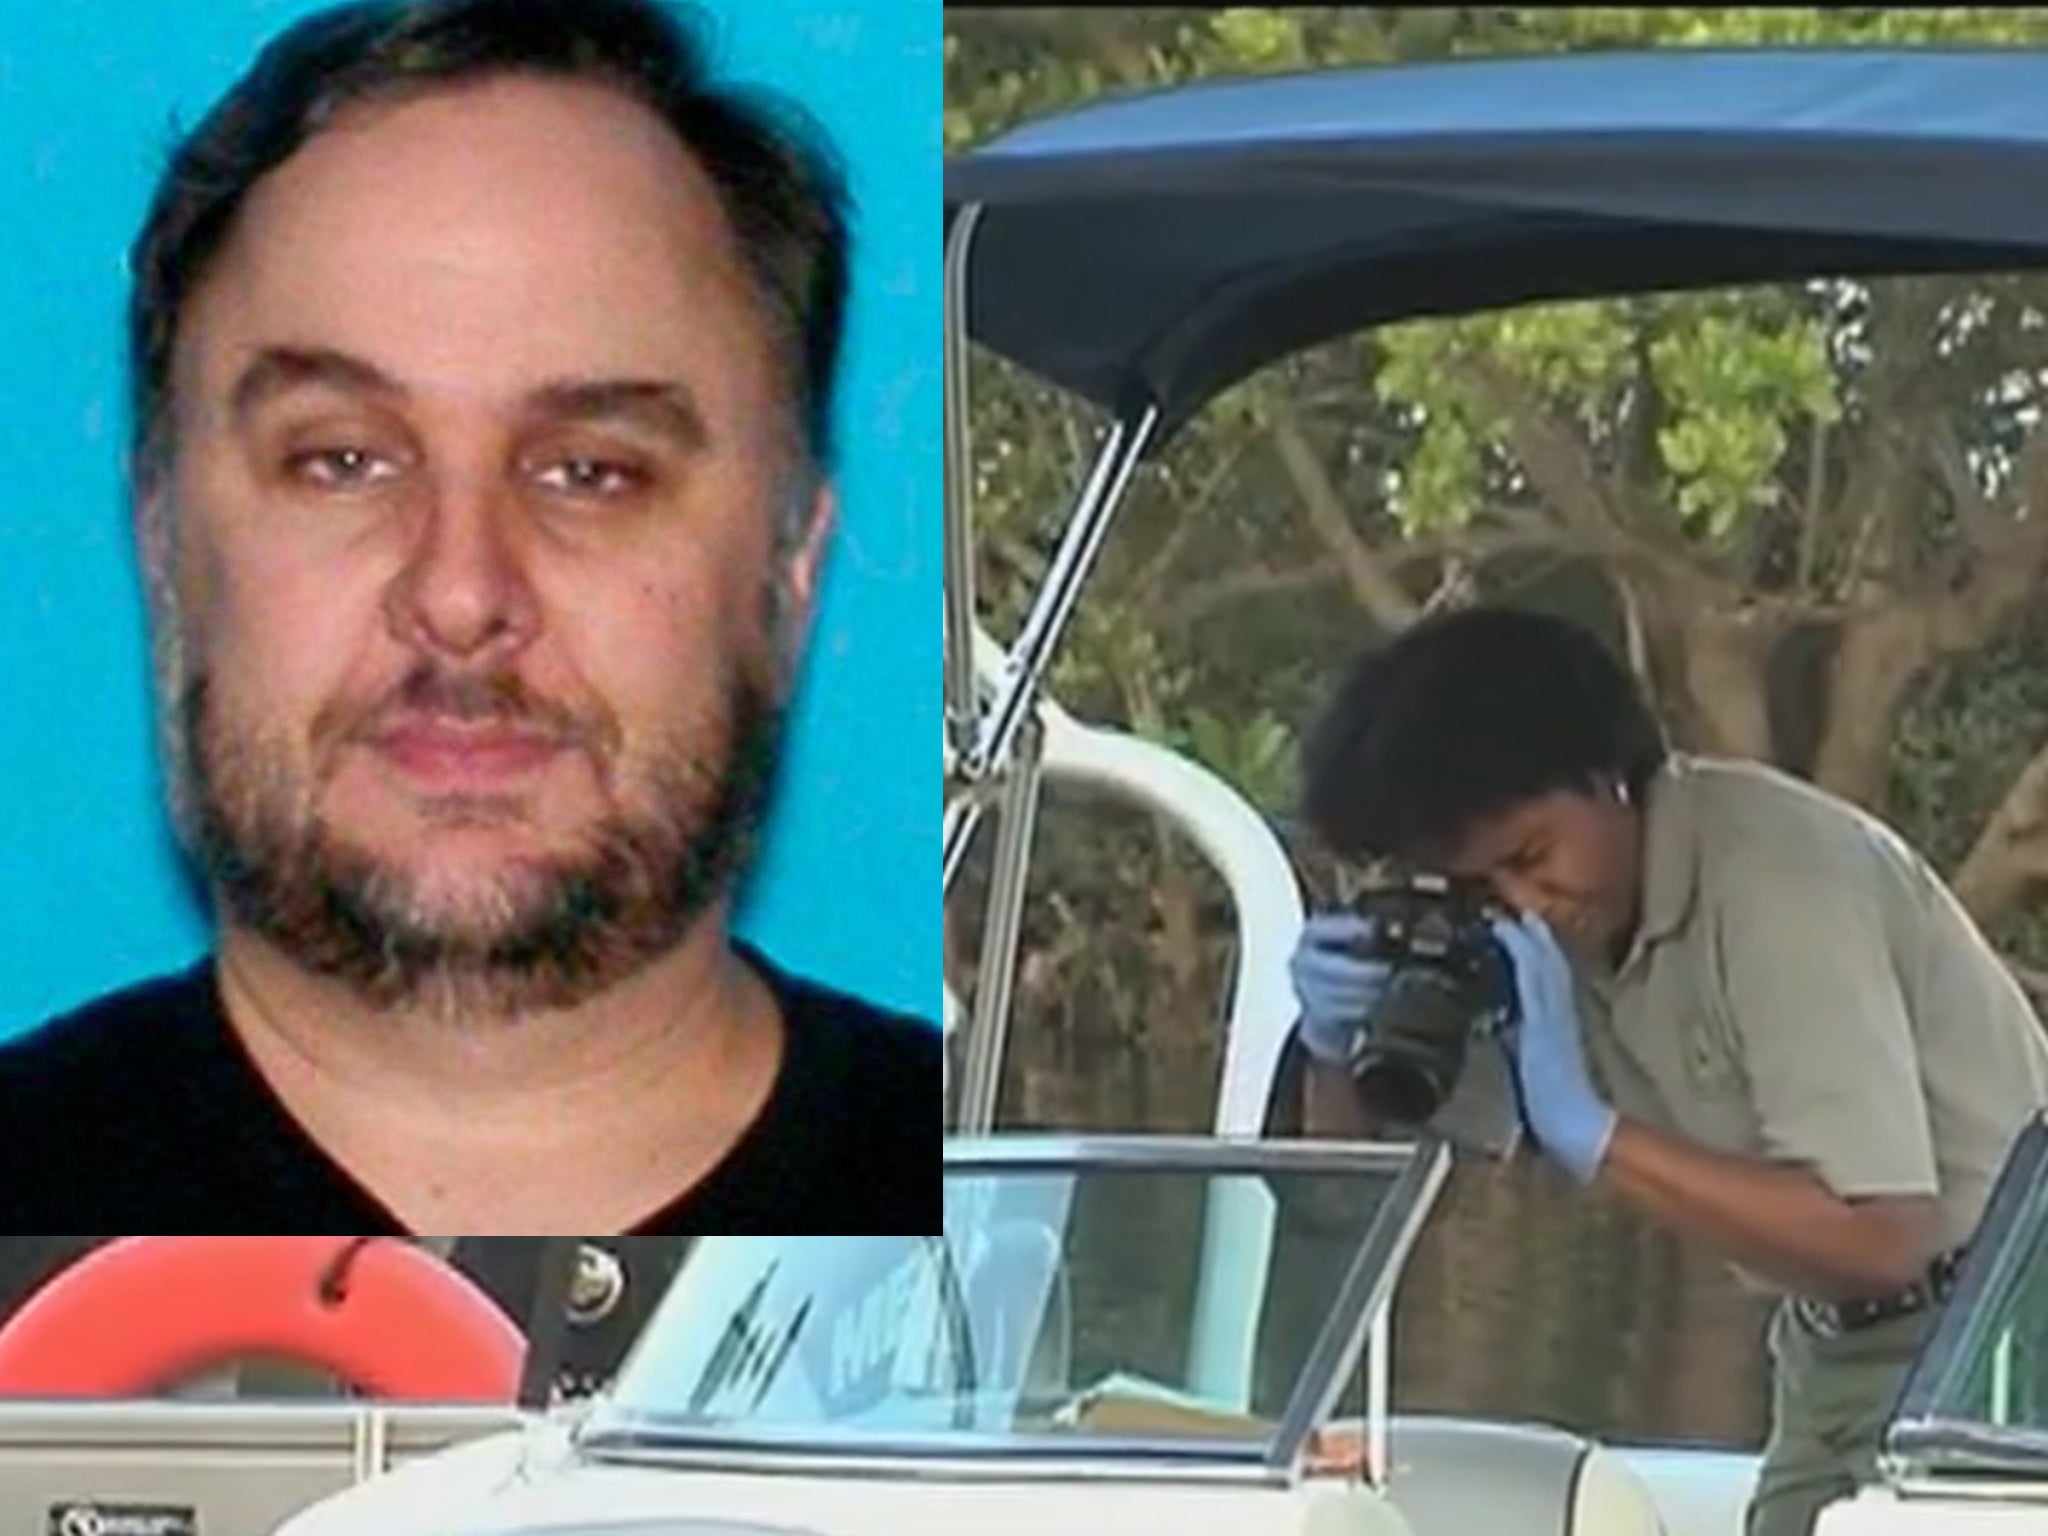 A photographer takes a picture of the rental boat Ohrn used to fake his death